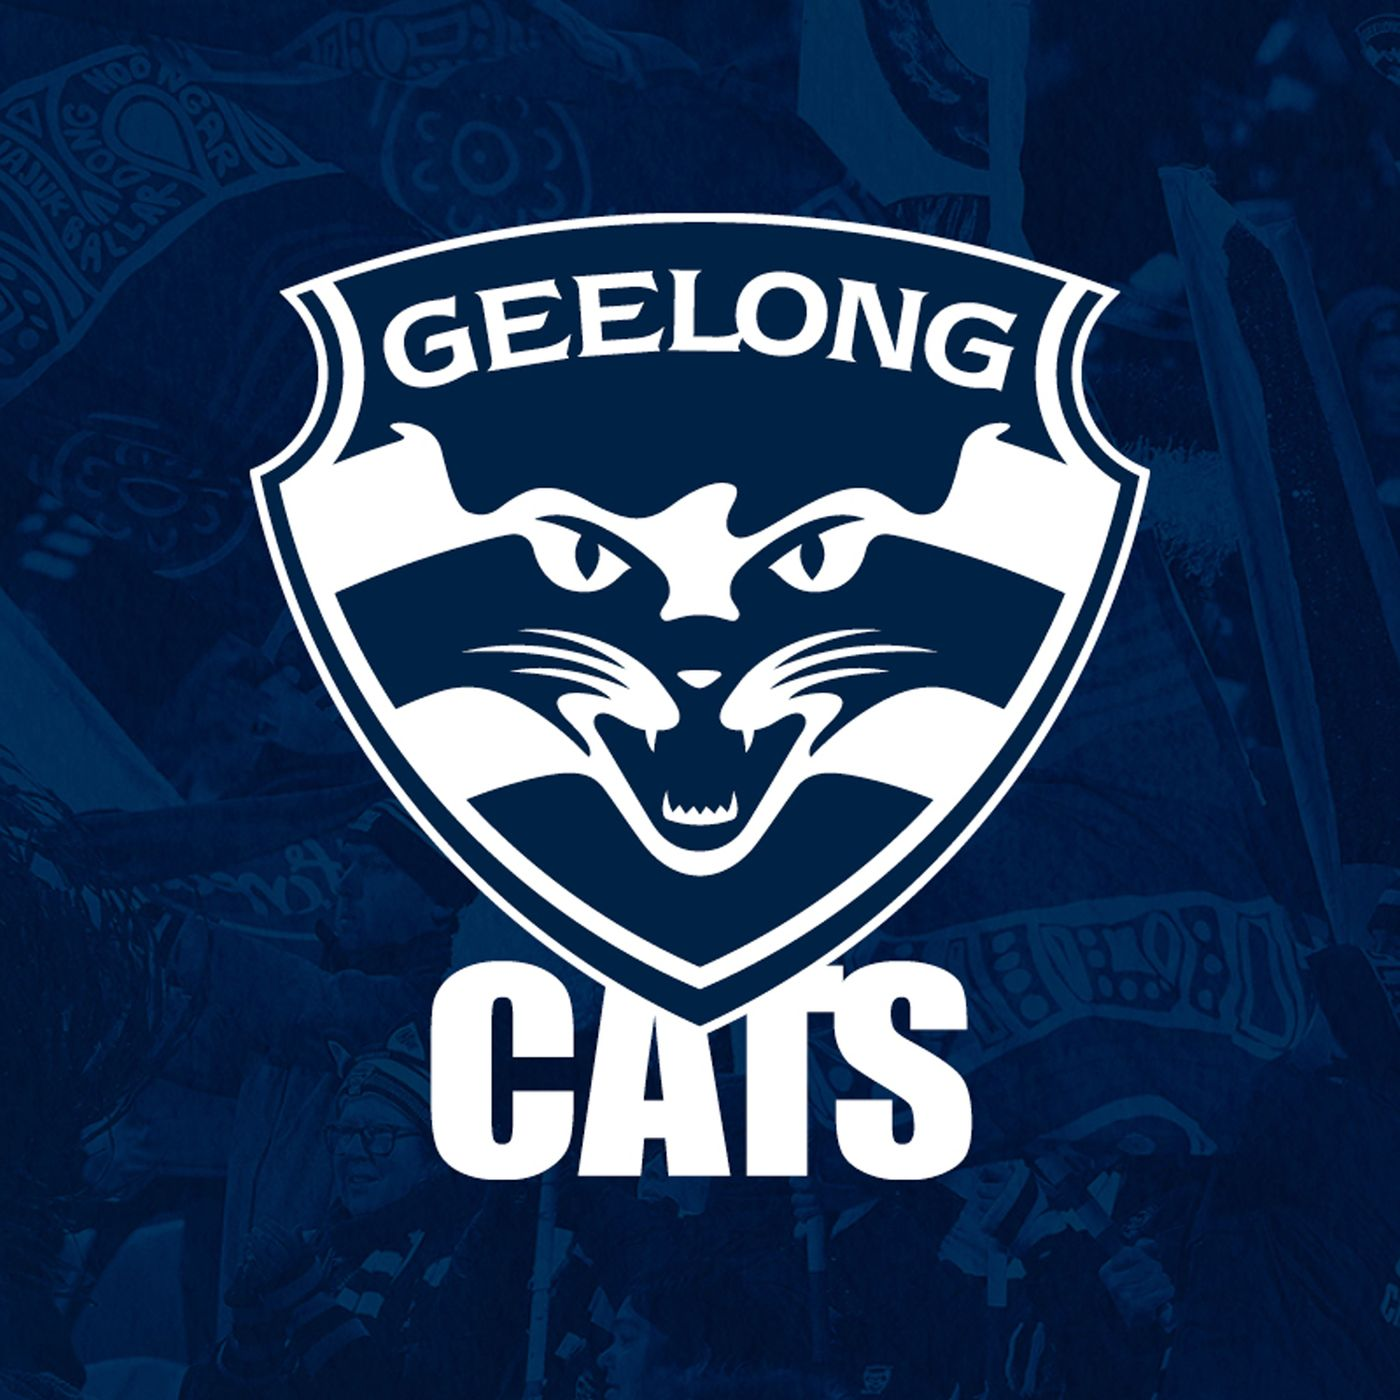 Cameron Ling with former Geelong Assistant Coach Brendan McCartney - Podcast Special